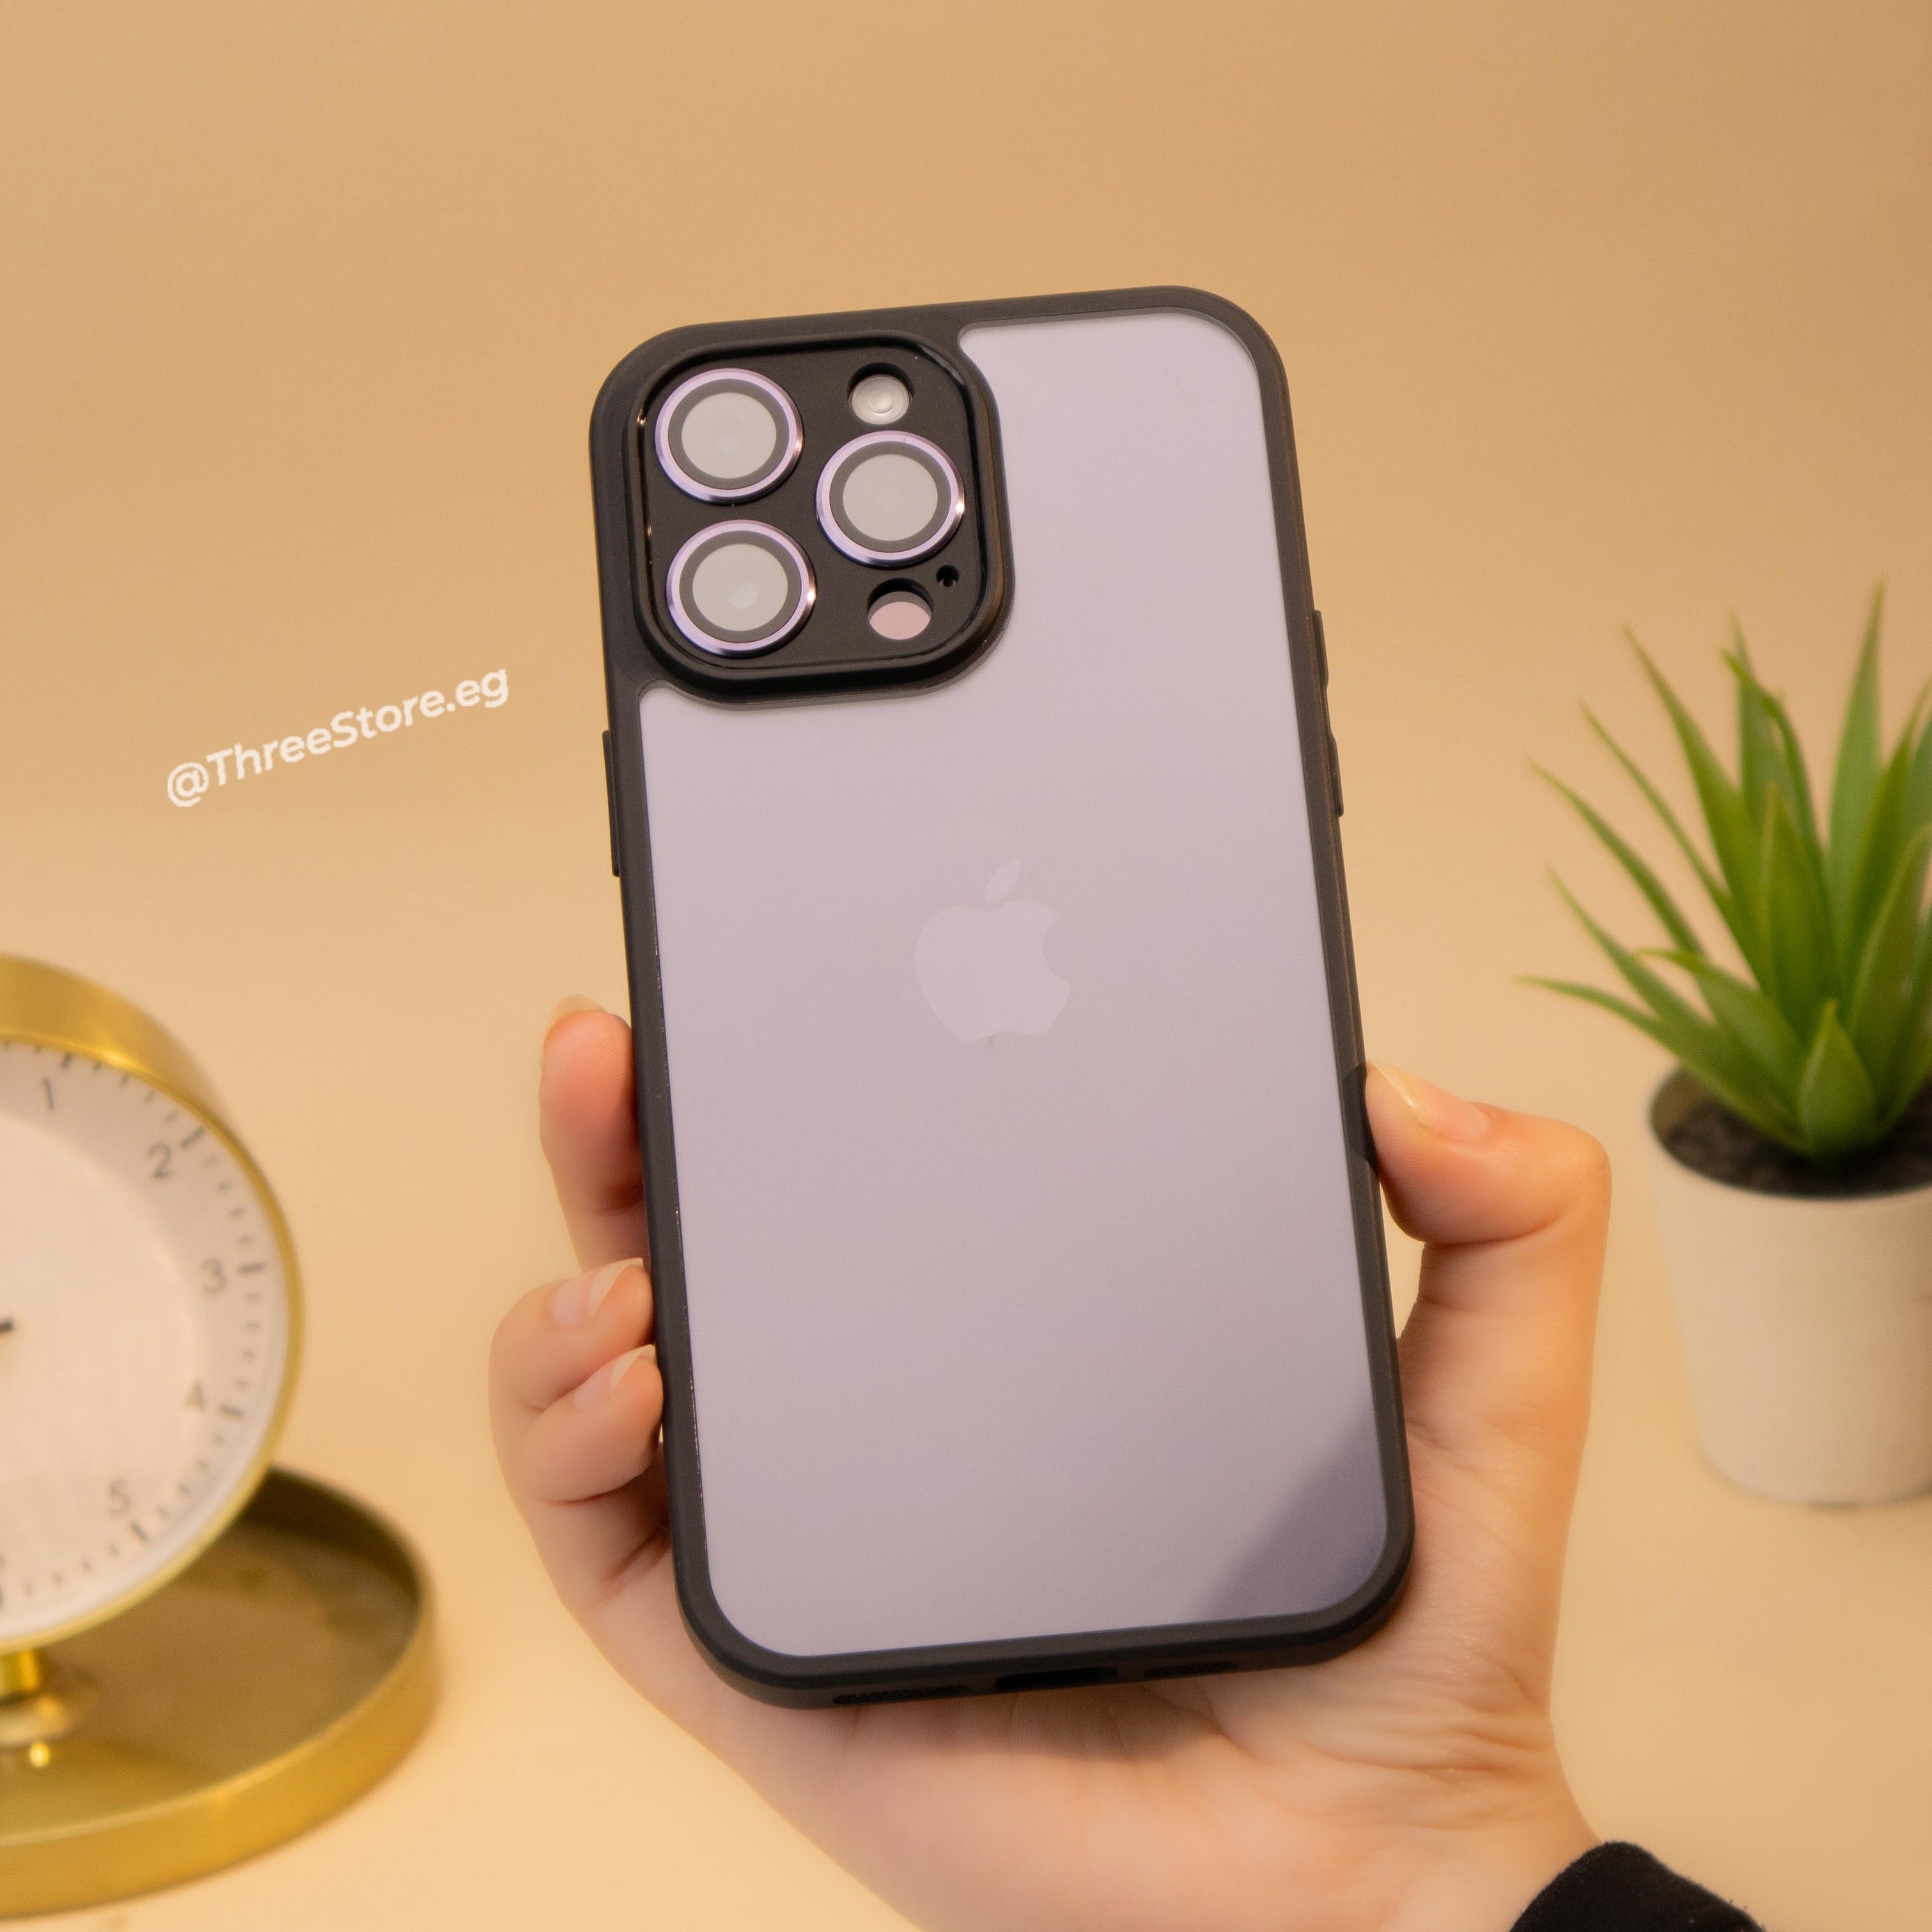 TPU Camera Protection Case iPhone 11 Pro Max Three store